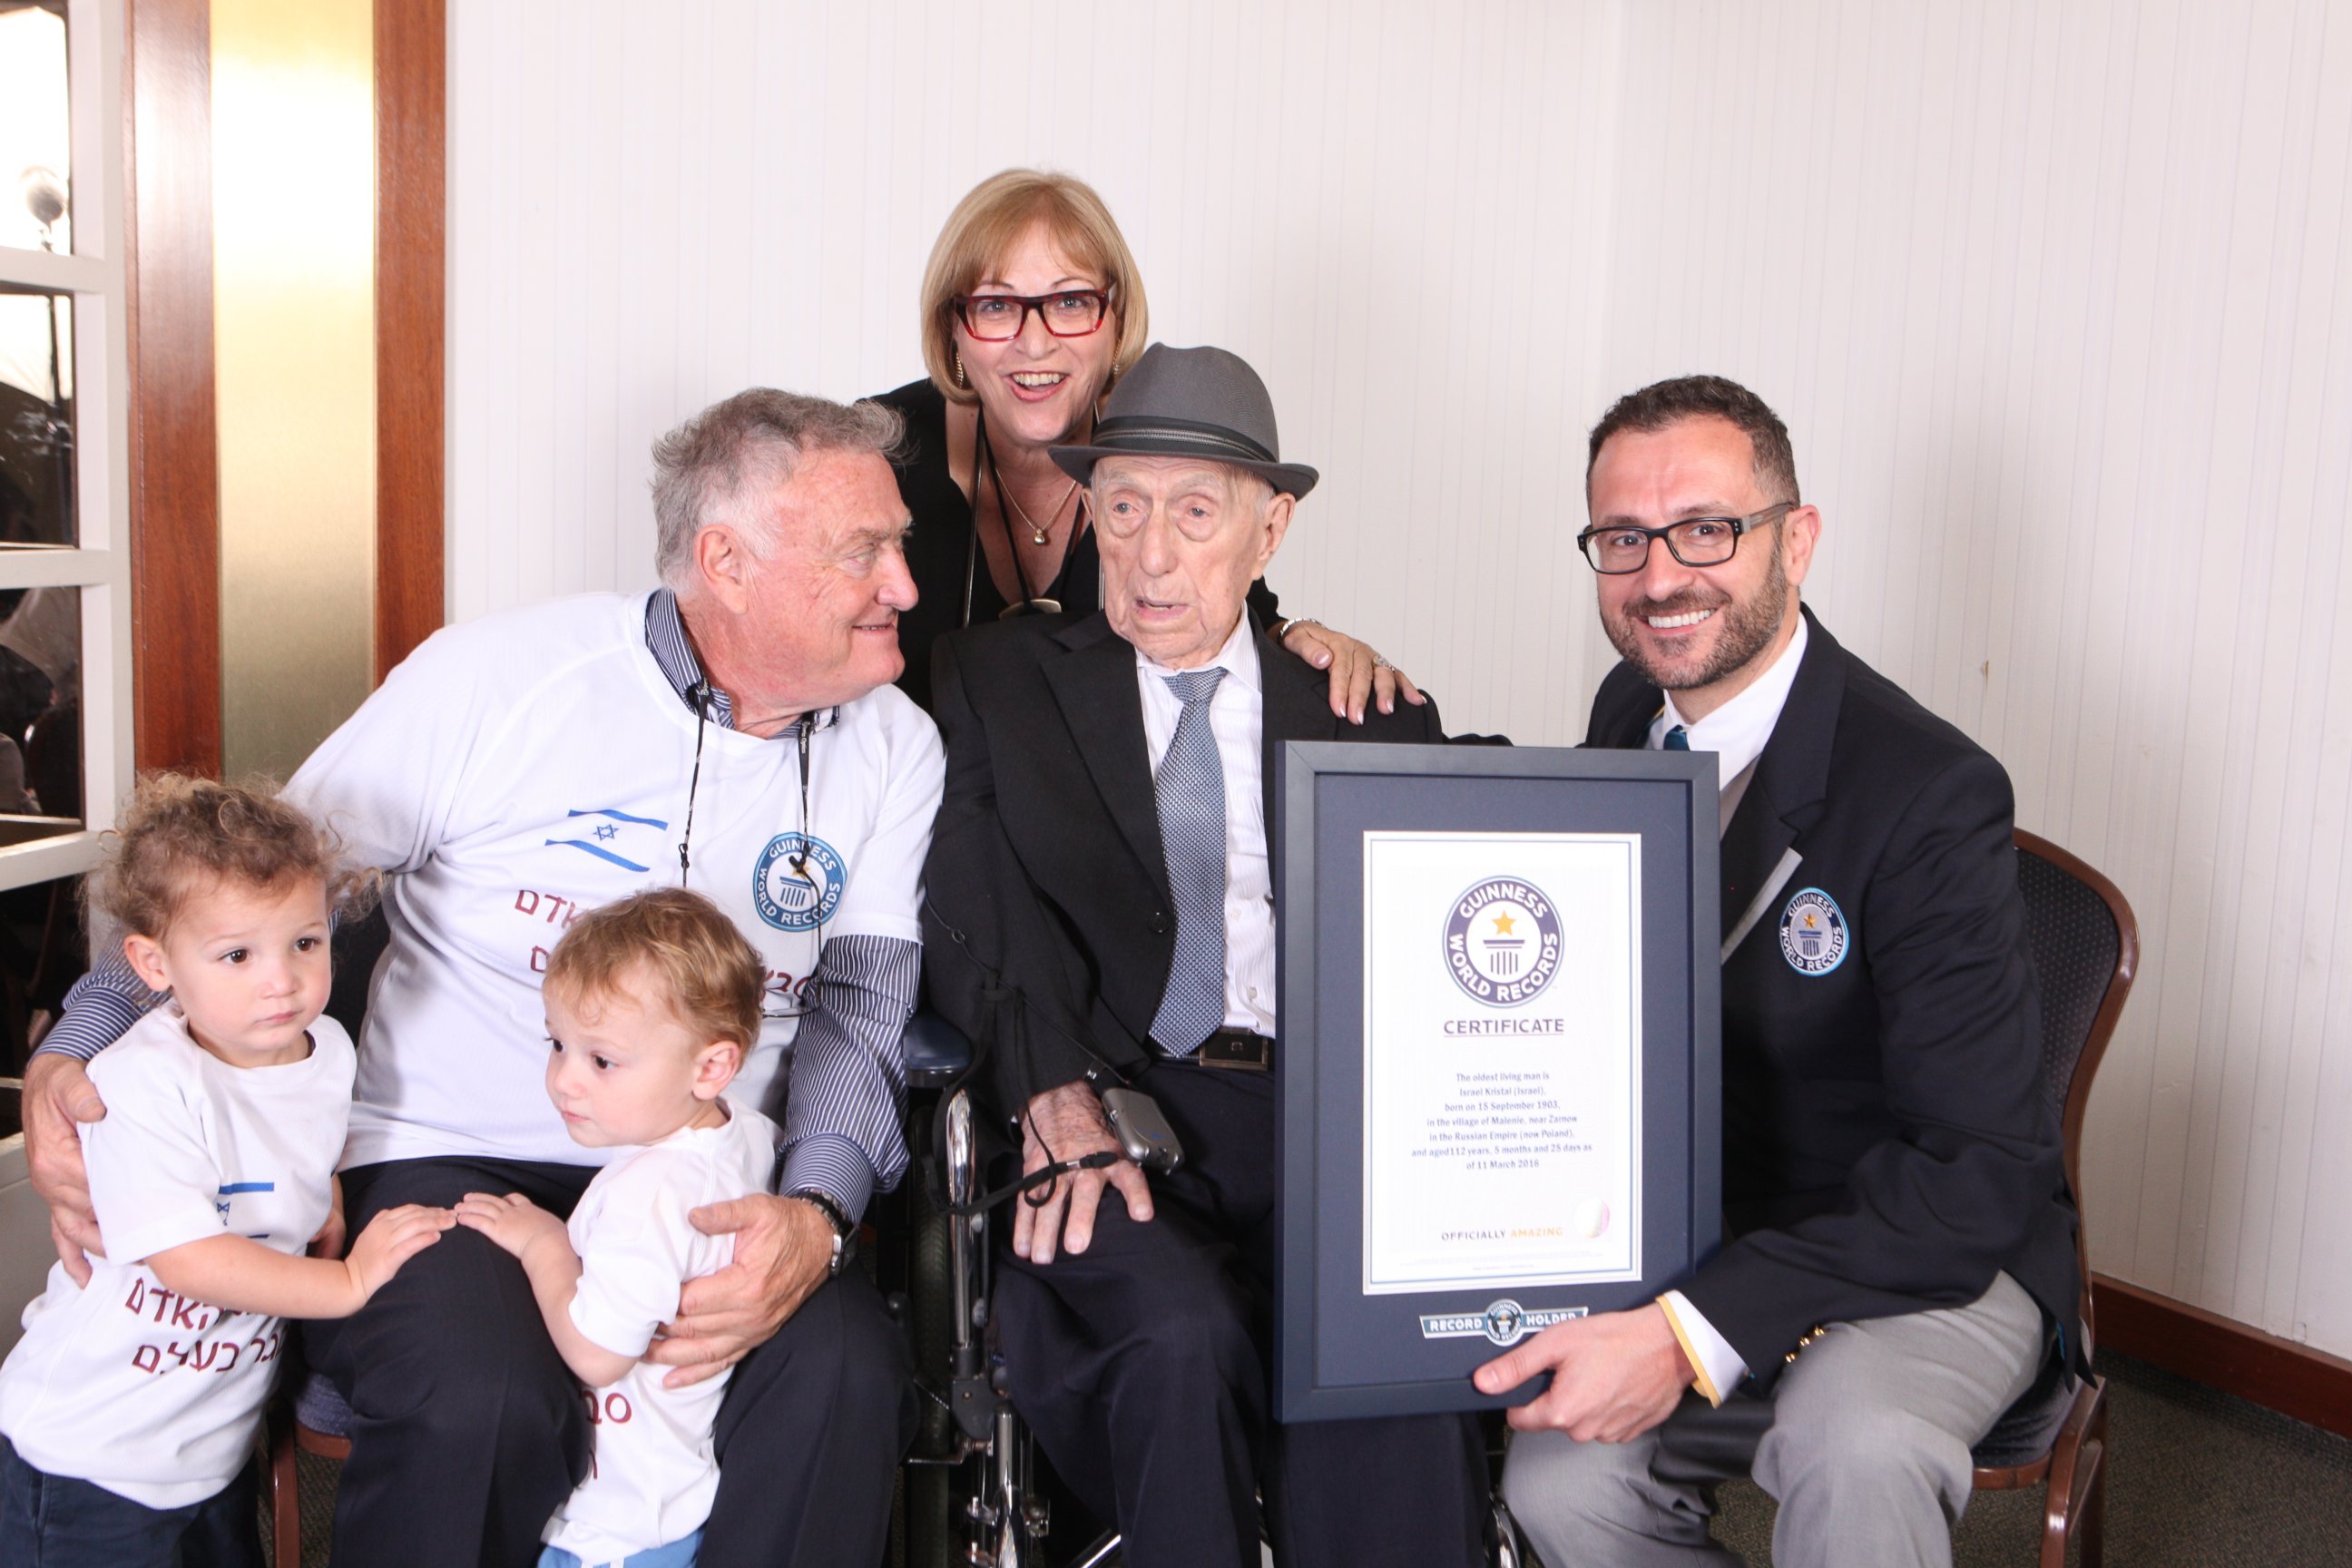 PHOTO: Kristal photographed with his daughter, Shula Kuperstach, his great grandchildren and Marco Frigatti, head of records.